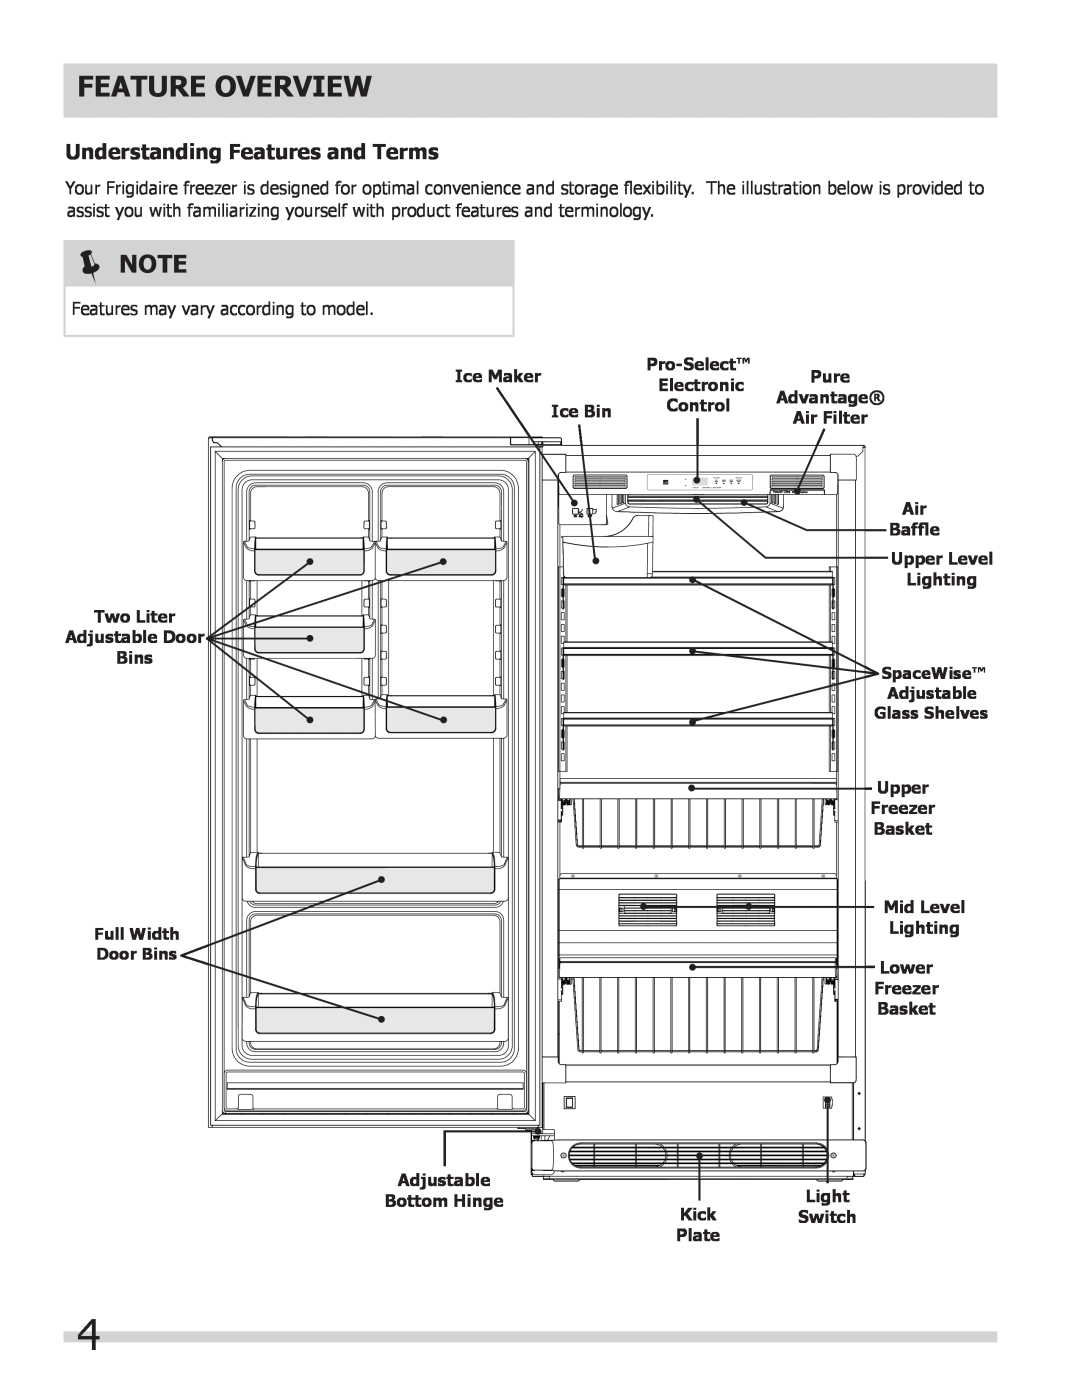 Frigidaire FPUH19D7LF, 297298800 important safety instructions Feature Overview,  Note, Understanding Features and Terms 